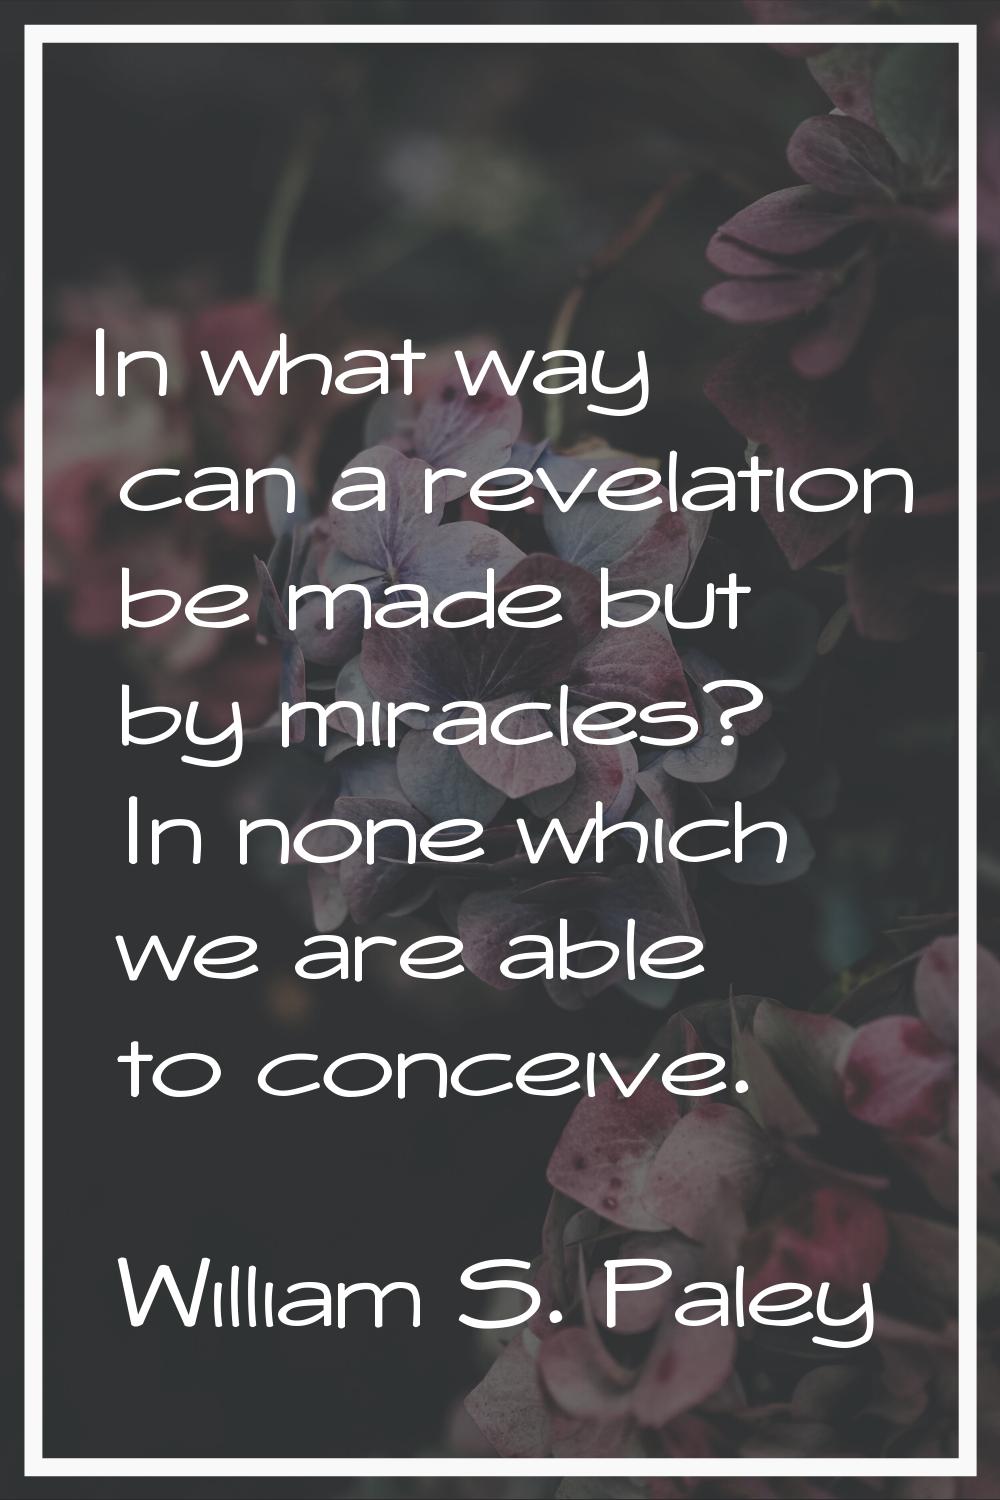 In what way can a revelation be made but by miracles? In none which we are able to conceive.